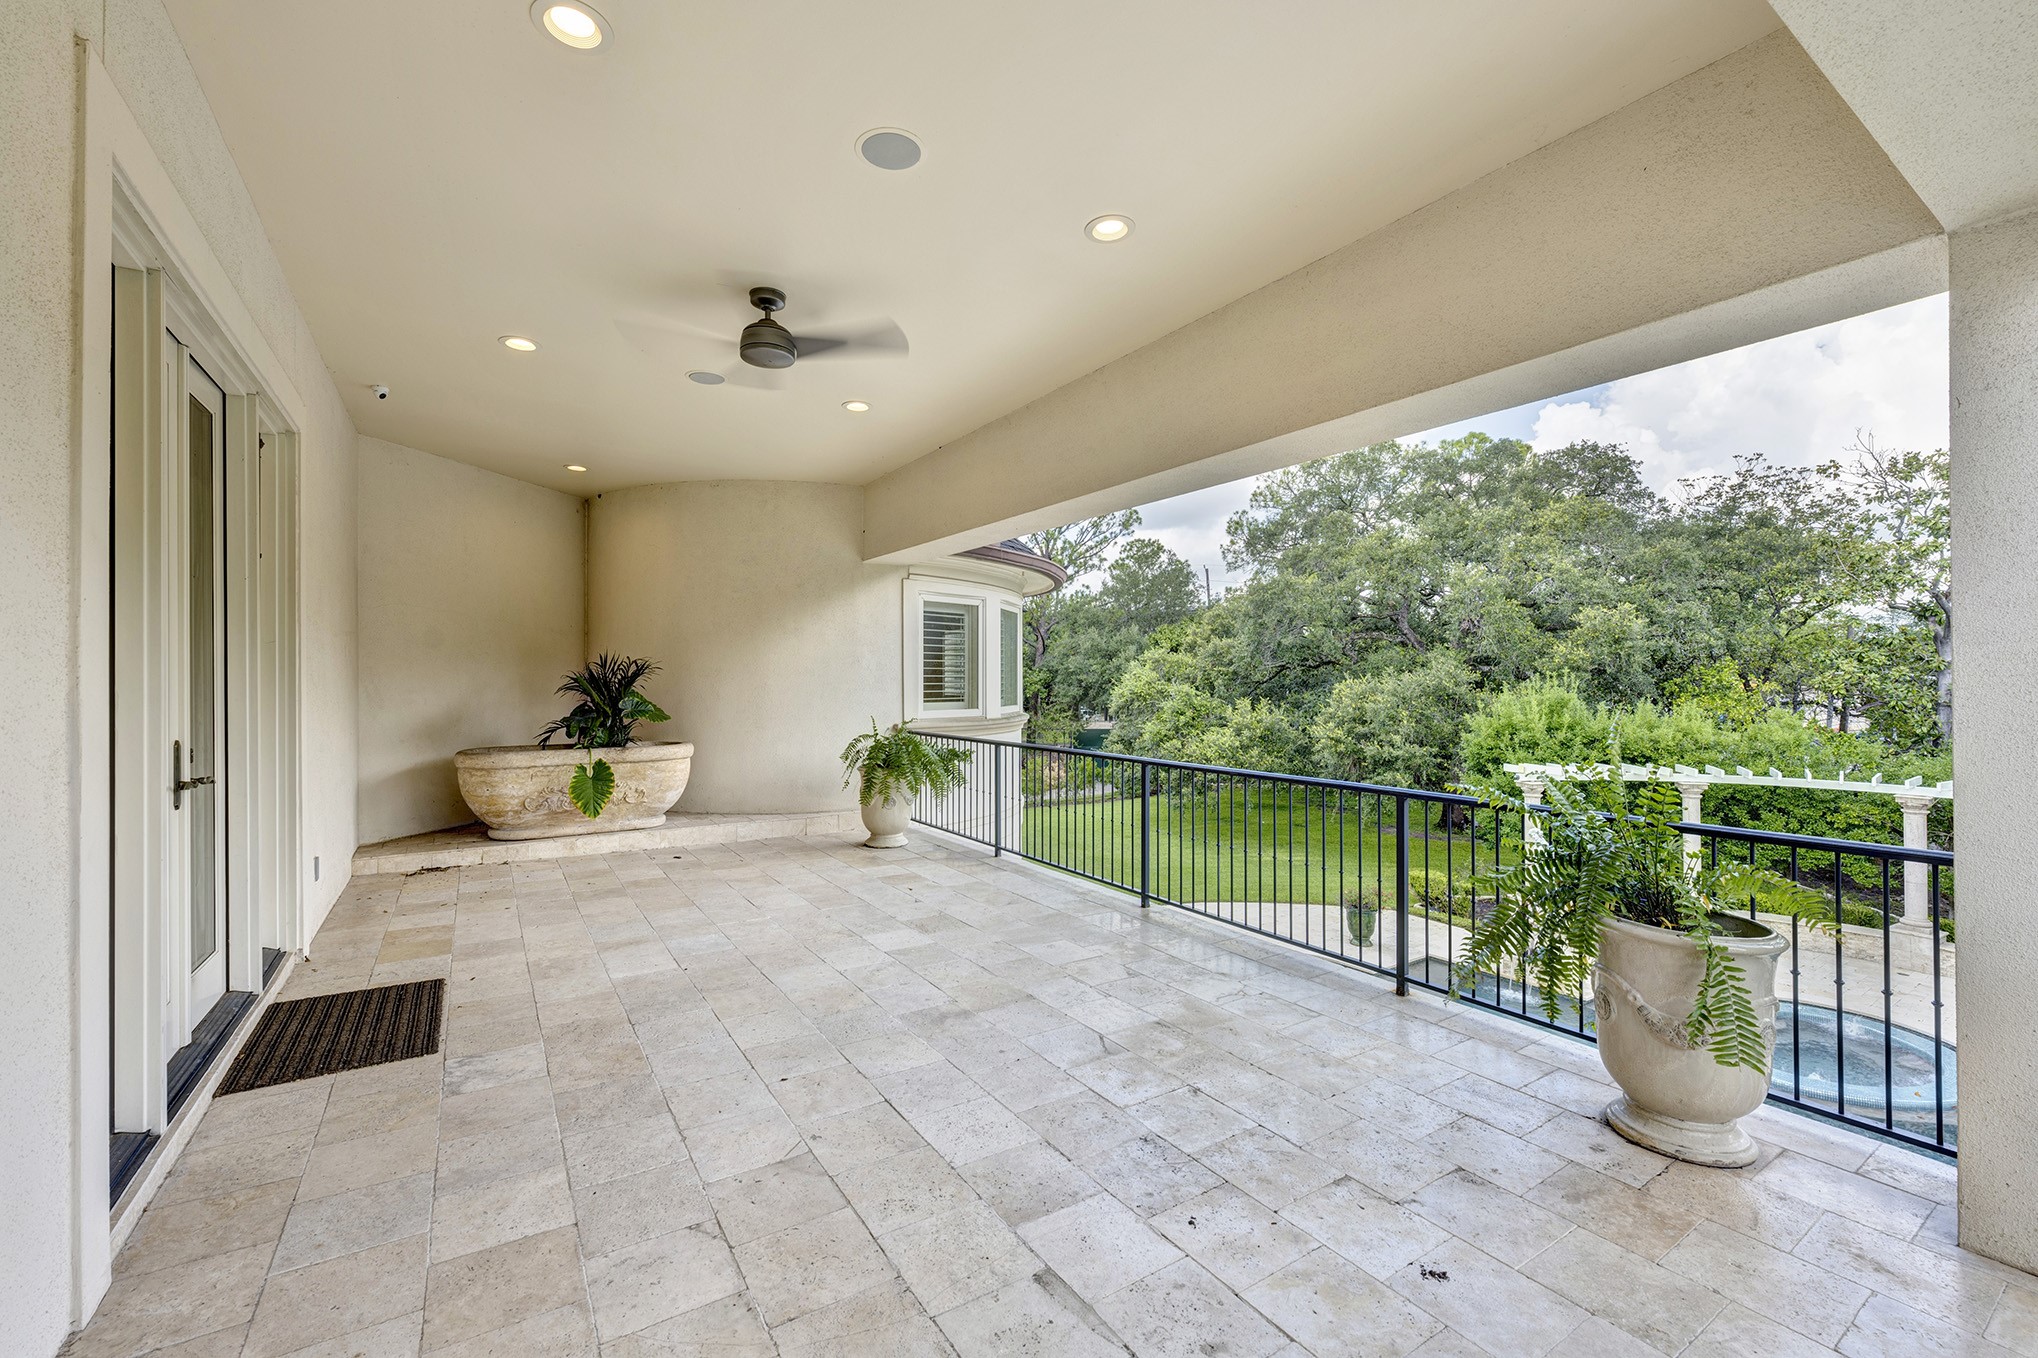 Covered balcony off primary suite overlooking pool with curved staircase to pool and yard.